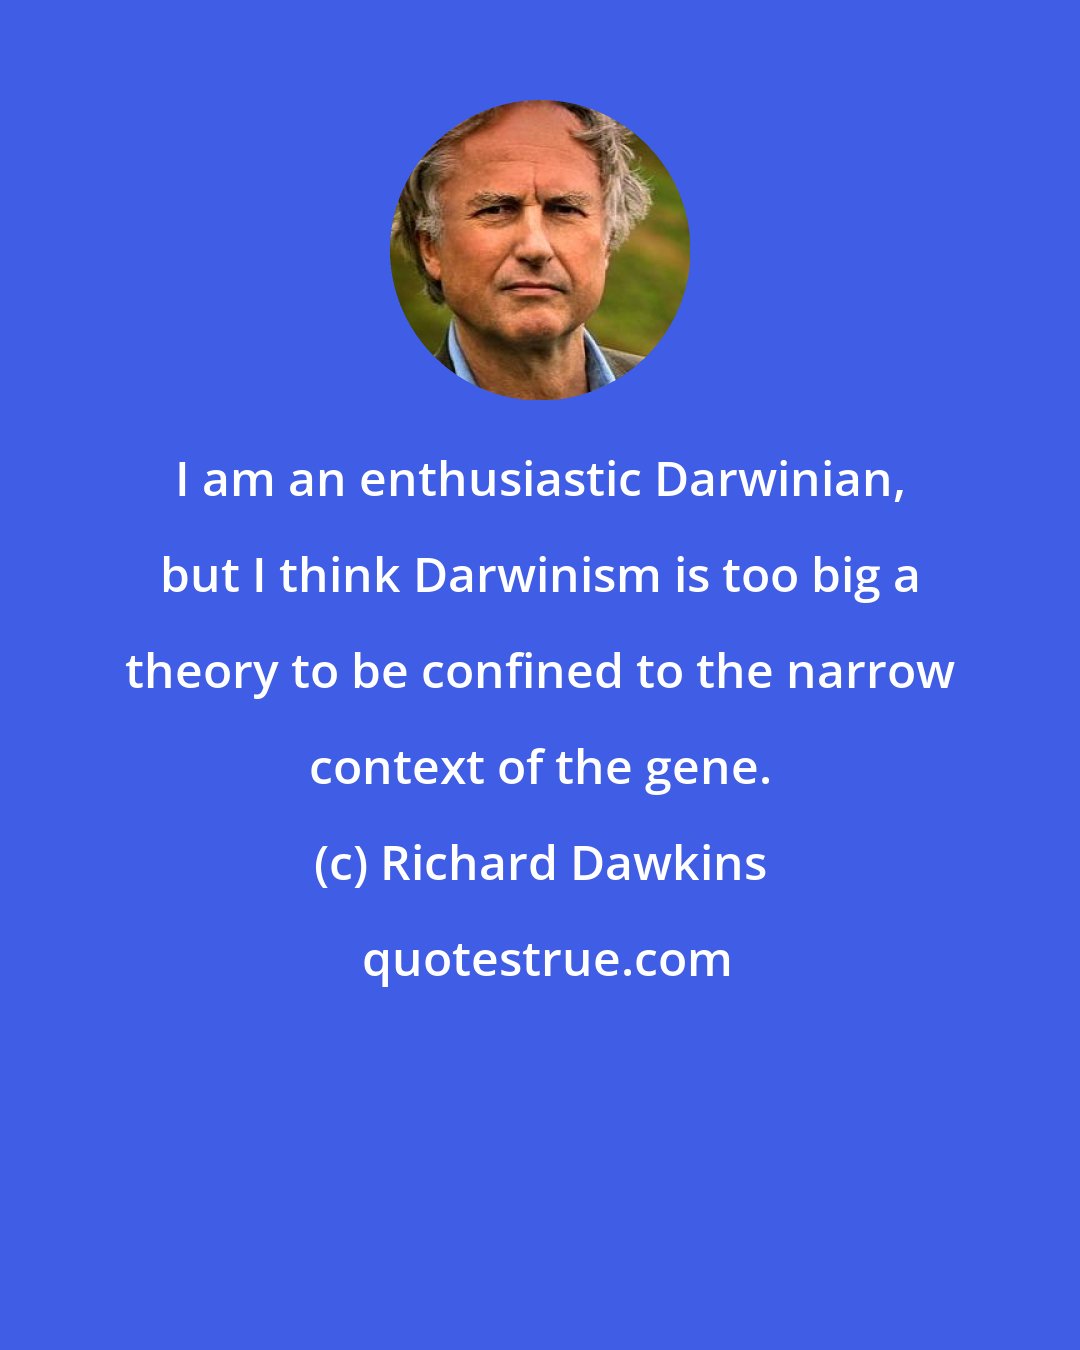 Richard Dawkins: I am an enthusiastic Darwinian, but I think Darwinism is too big a theory to be confined to the narrow context of the gene.